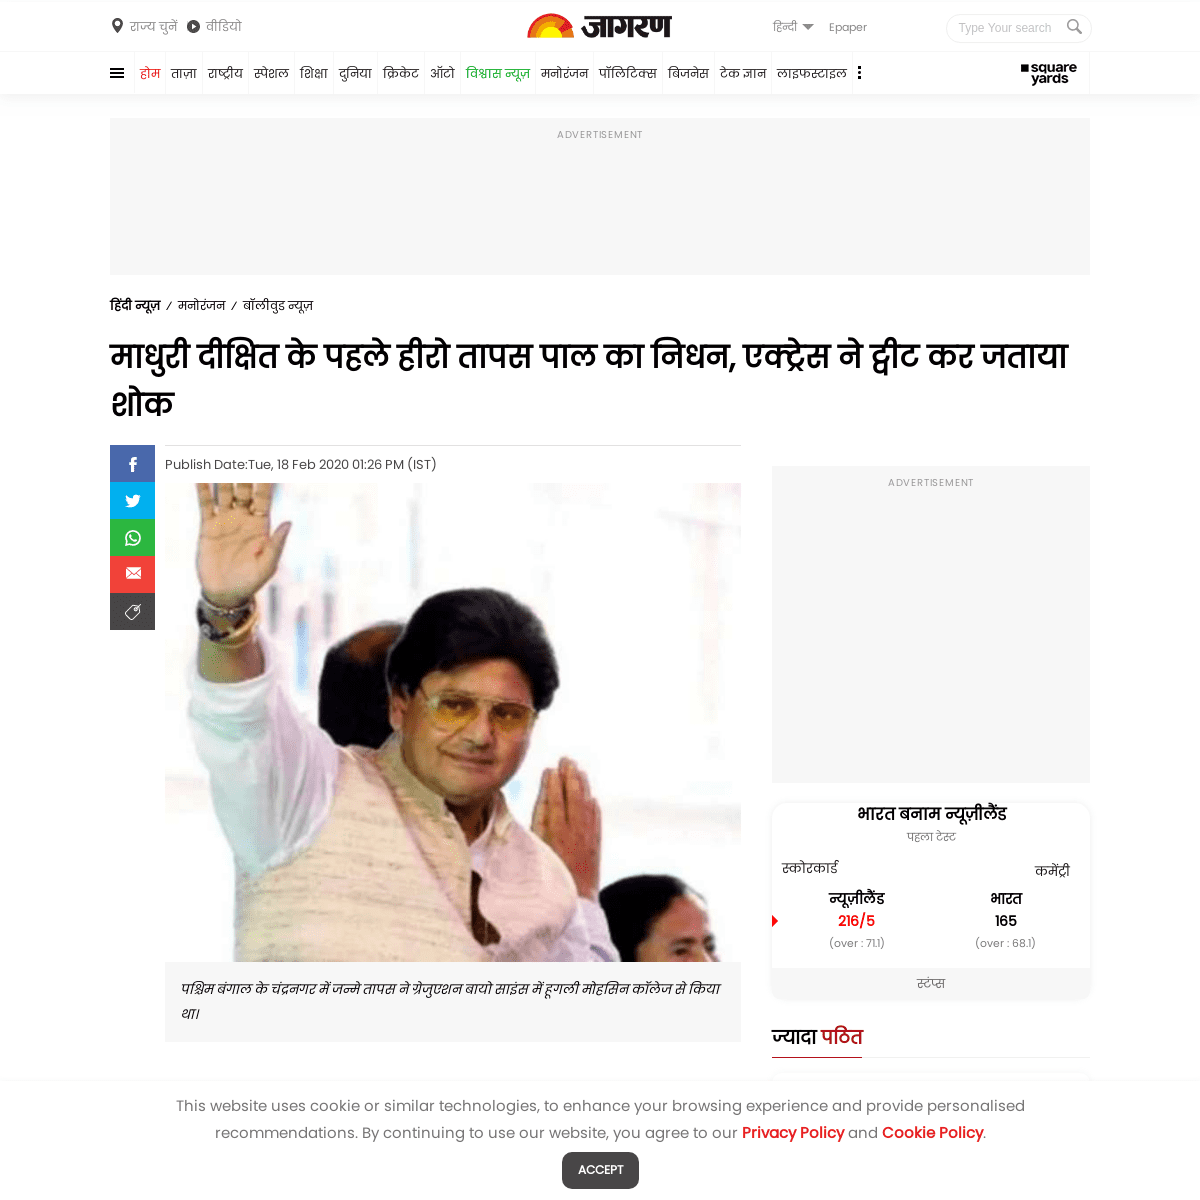 A complete backup of www.jagran.com/entertainment/bollywood-bengali-actor-and-former-mp-tapas-pal-dies-at-61-due-to-cardiac-arre